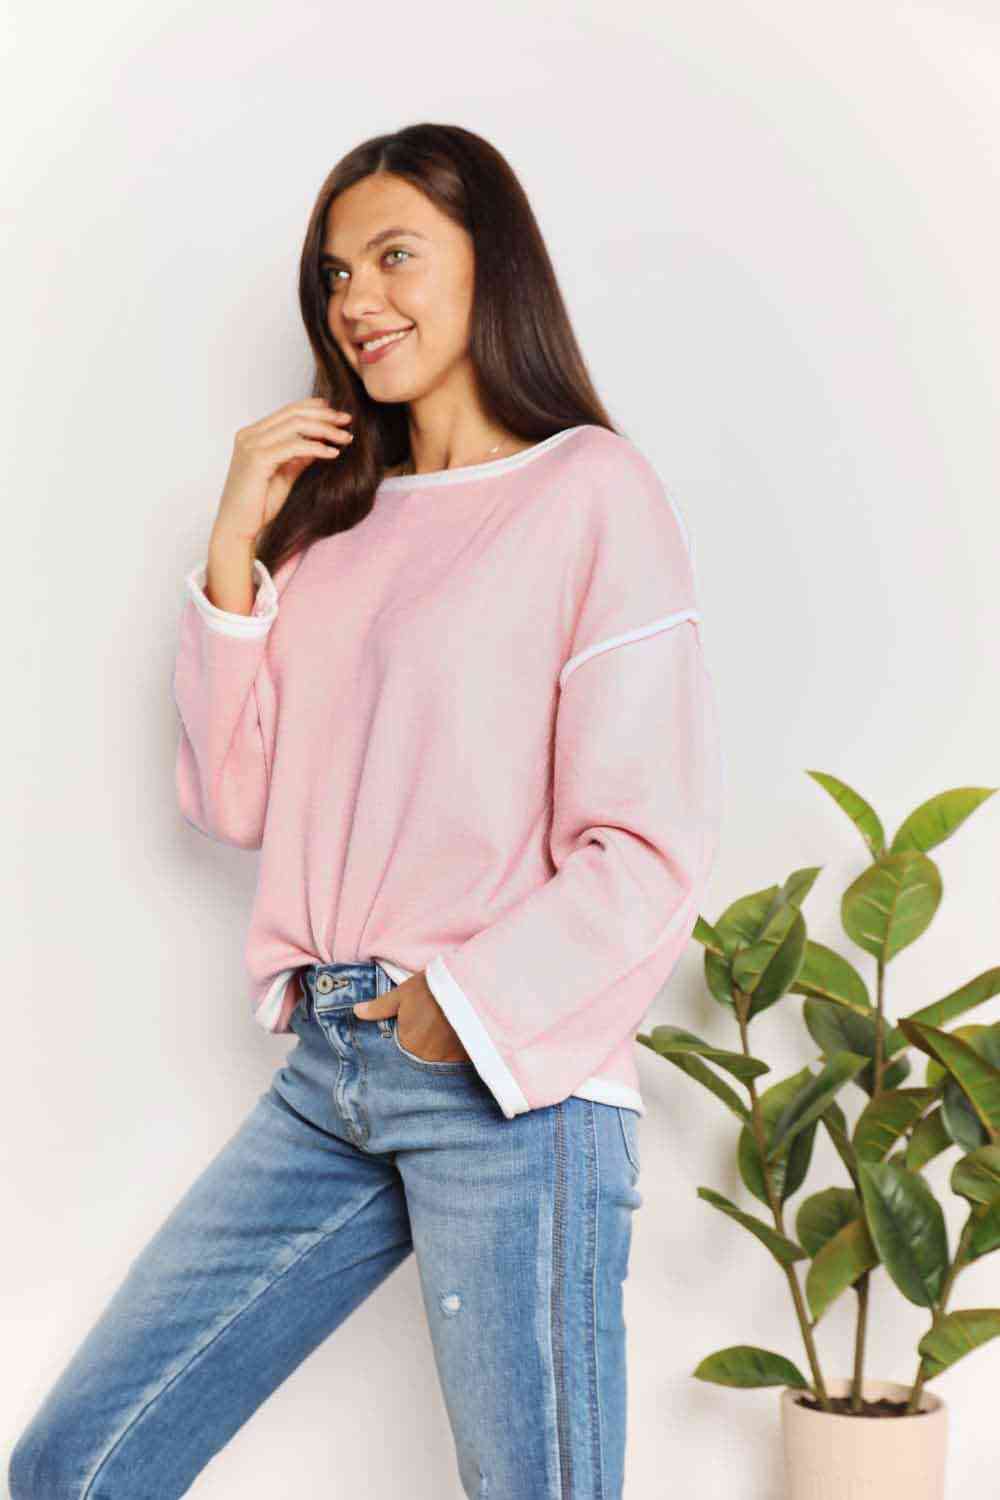 Double Take Contrast Detail Dropped Shoulder Knit Top - Guy Christopher